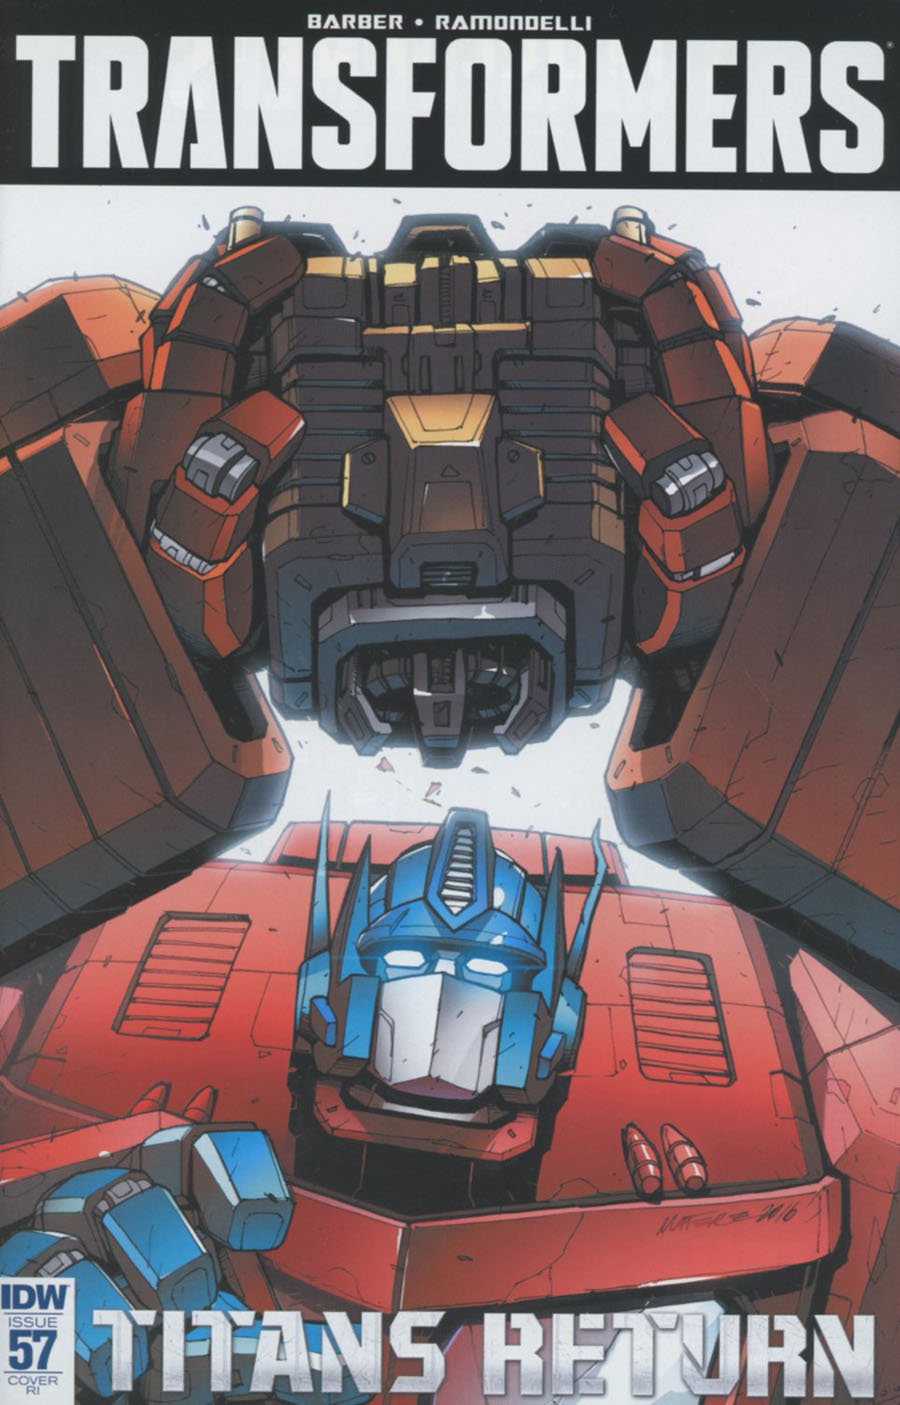 Transformers Vol 3 #57 Cover C Incentive Marcelo Matere Variant Cover (Revolution Tie-In)